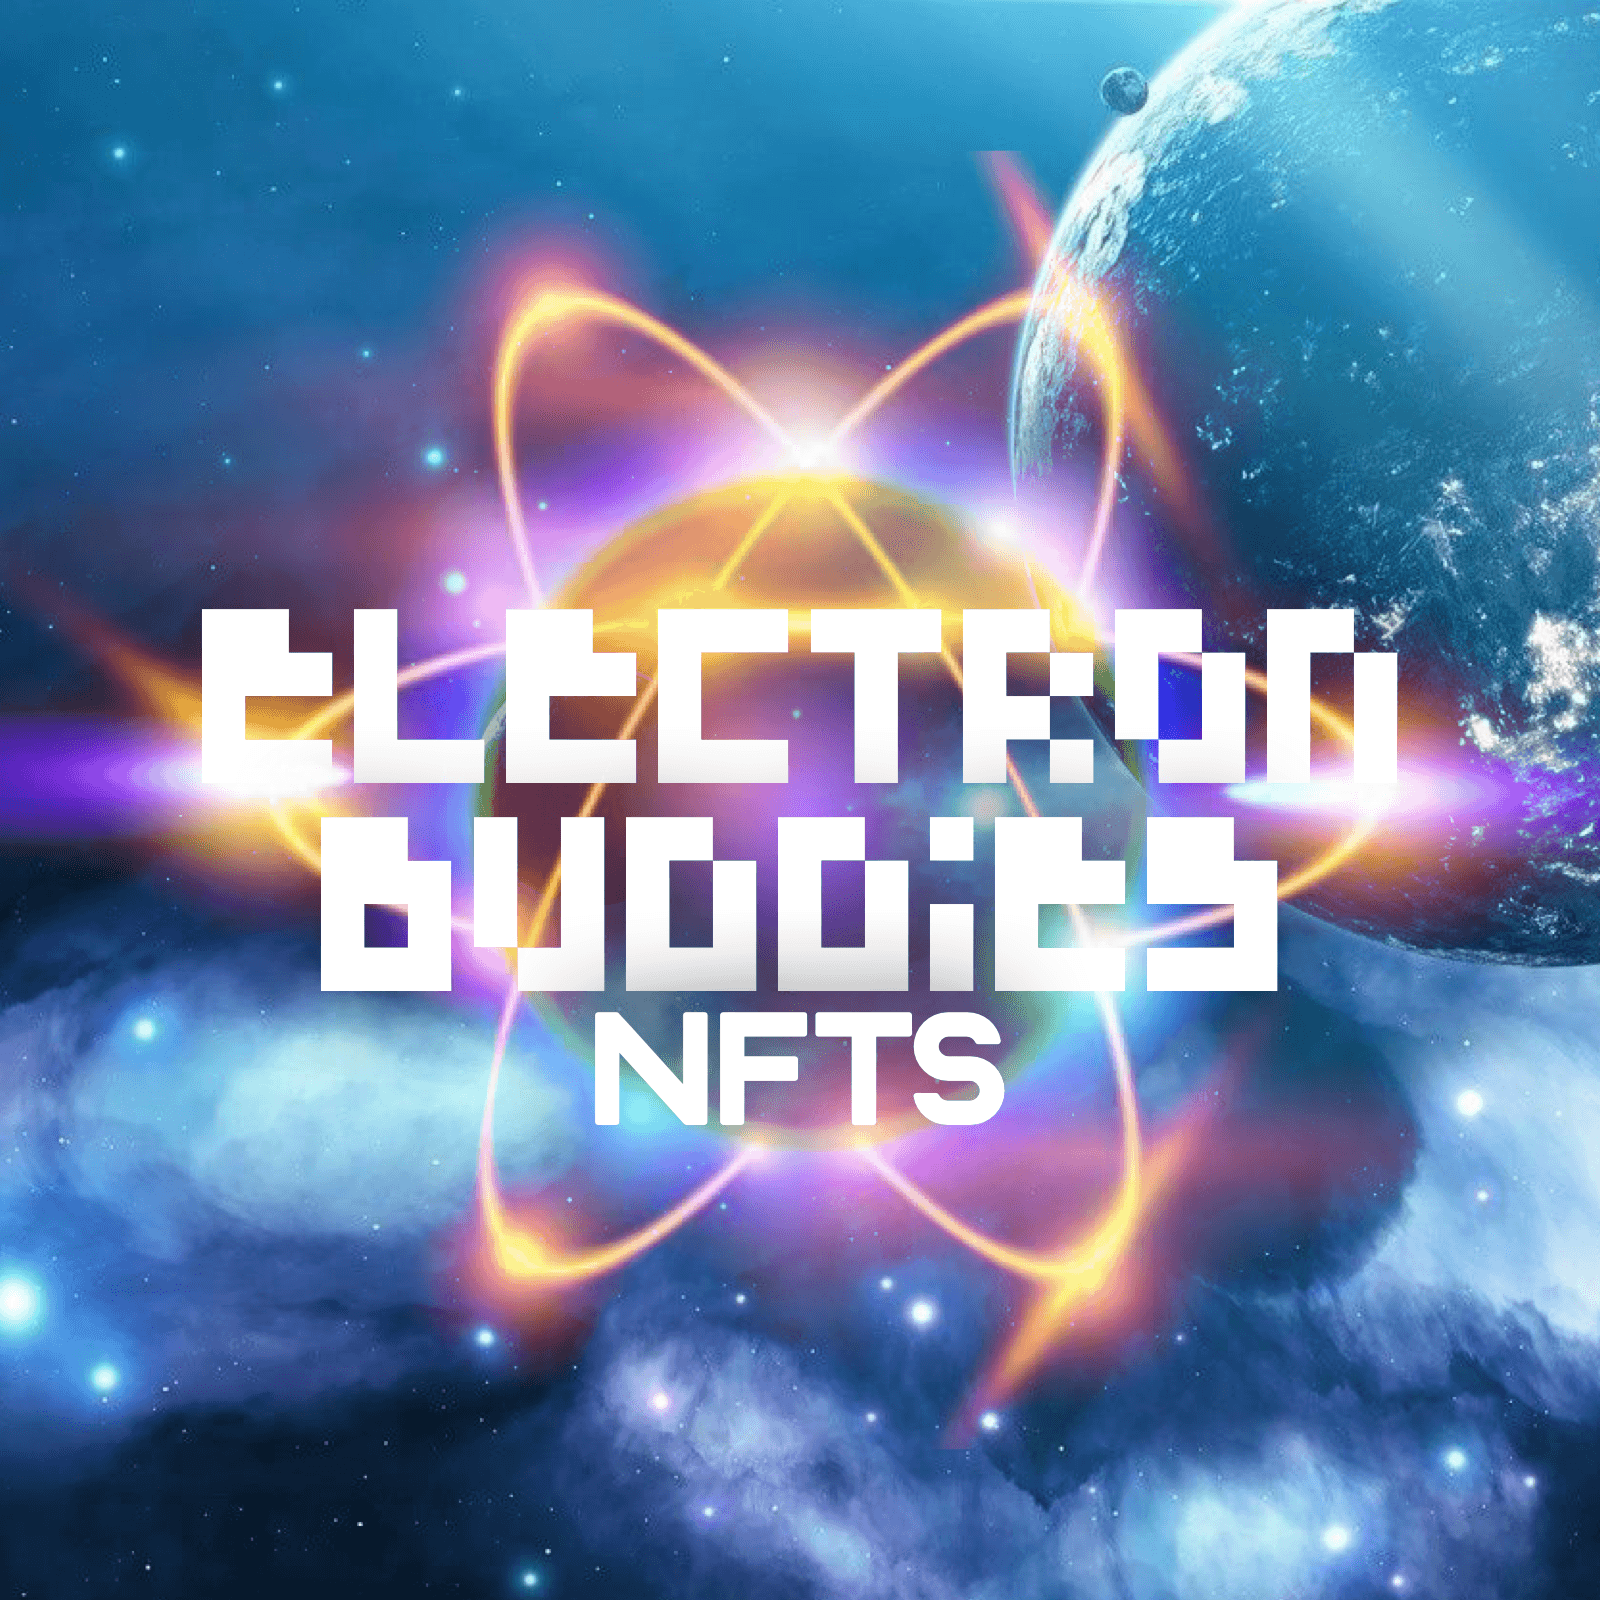 Electron Buddies coming soon part 2